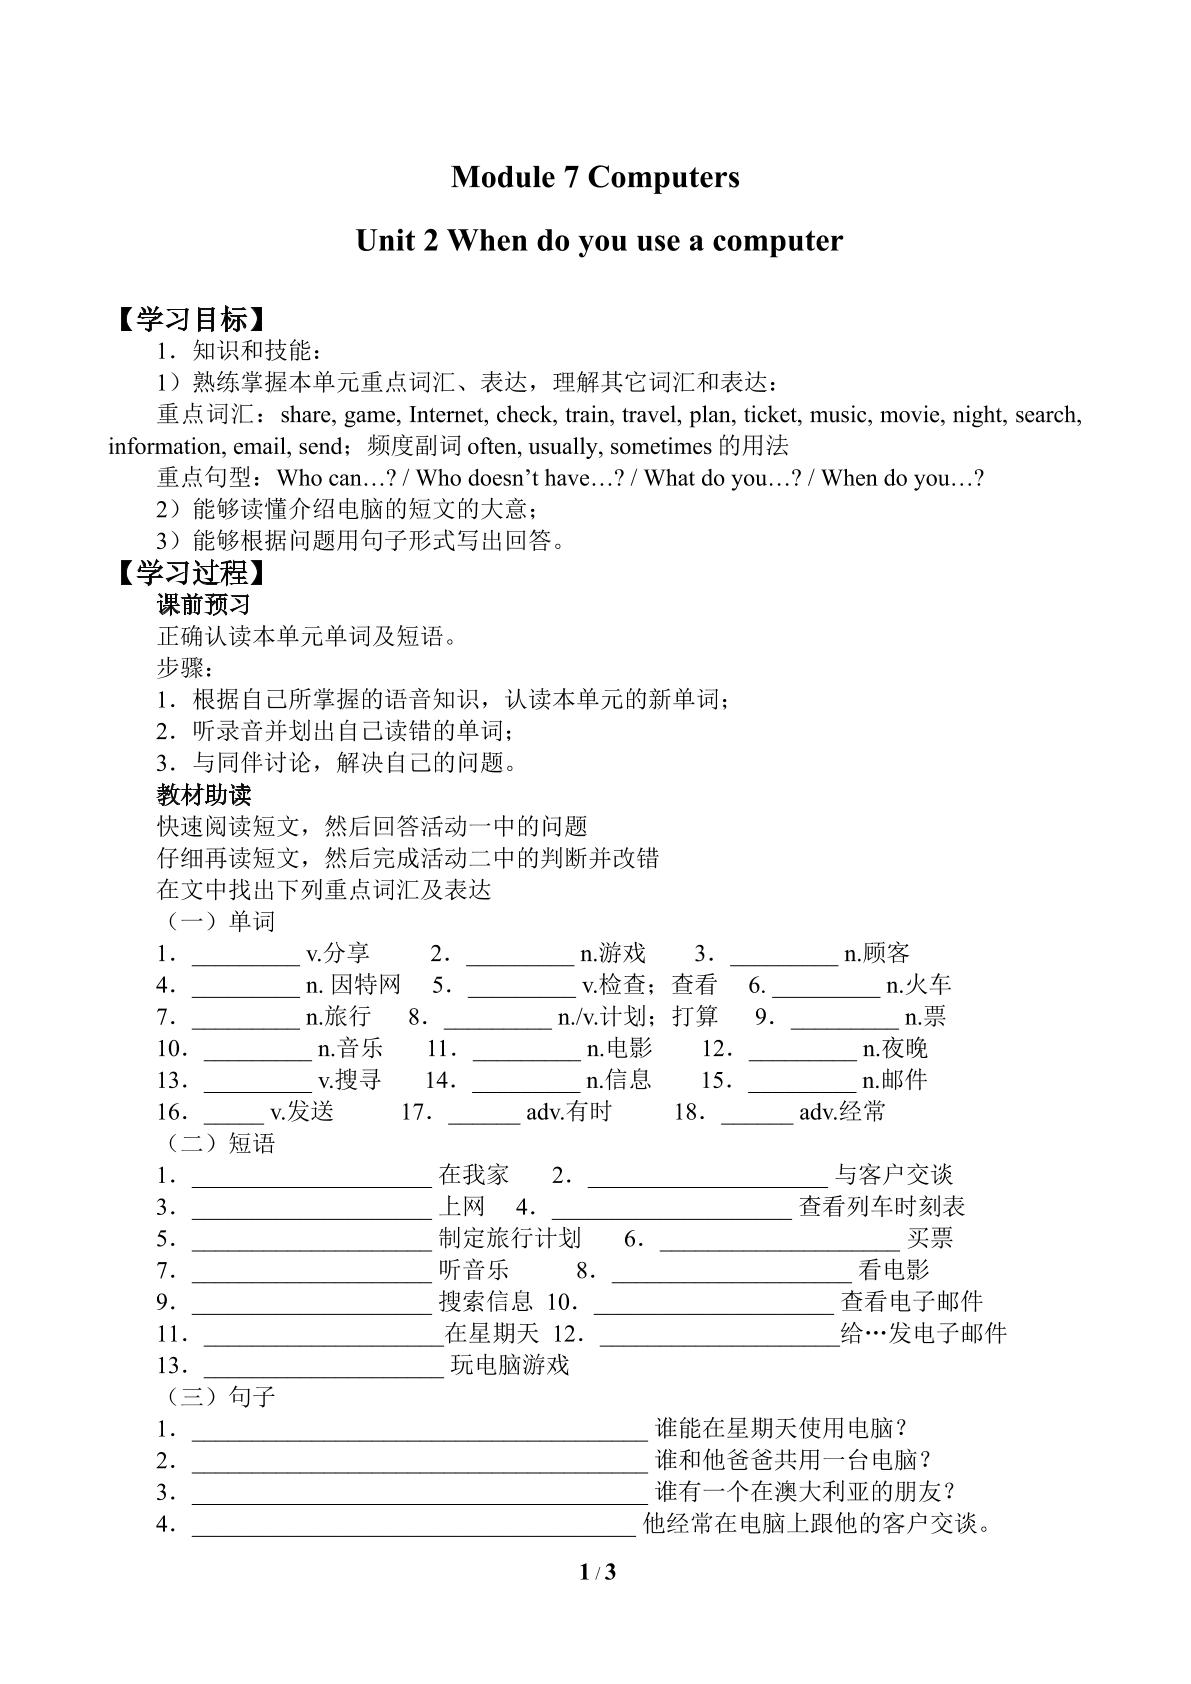 Unit 2 When do you use a computer？_学案1